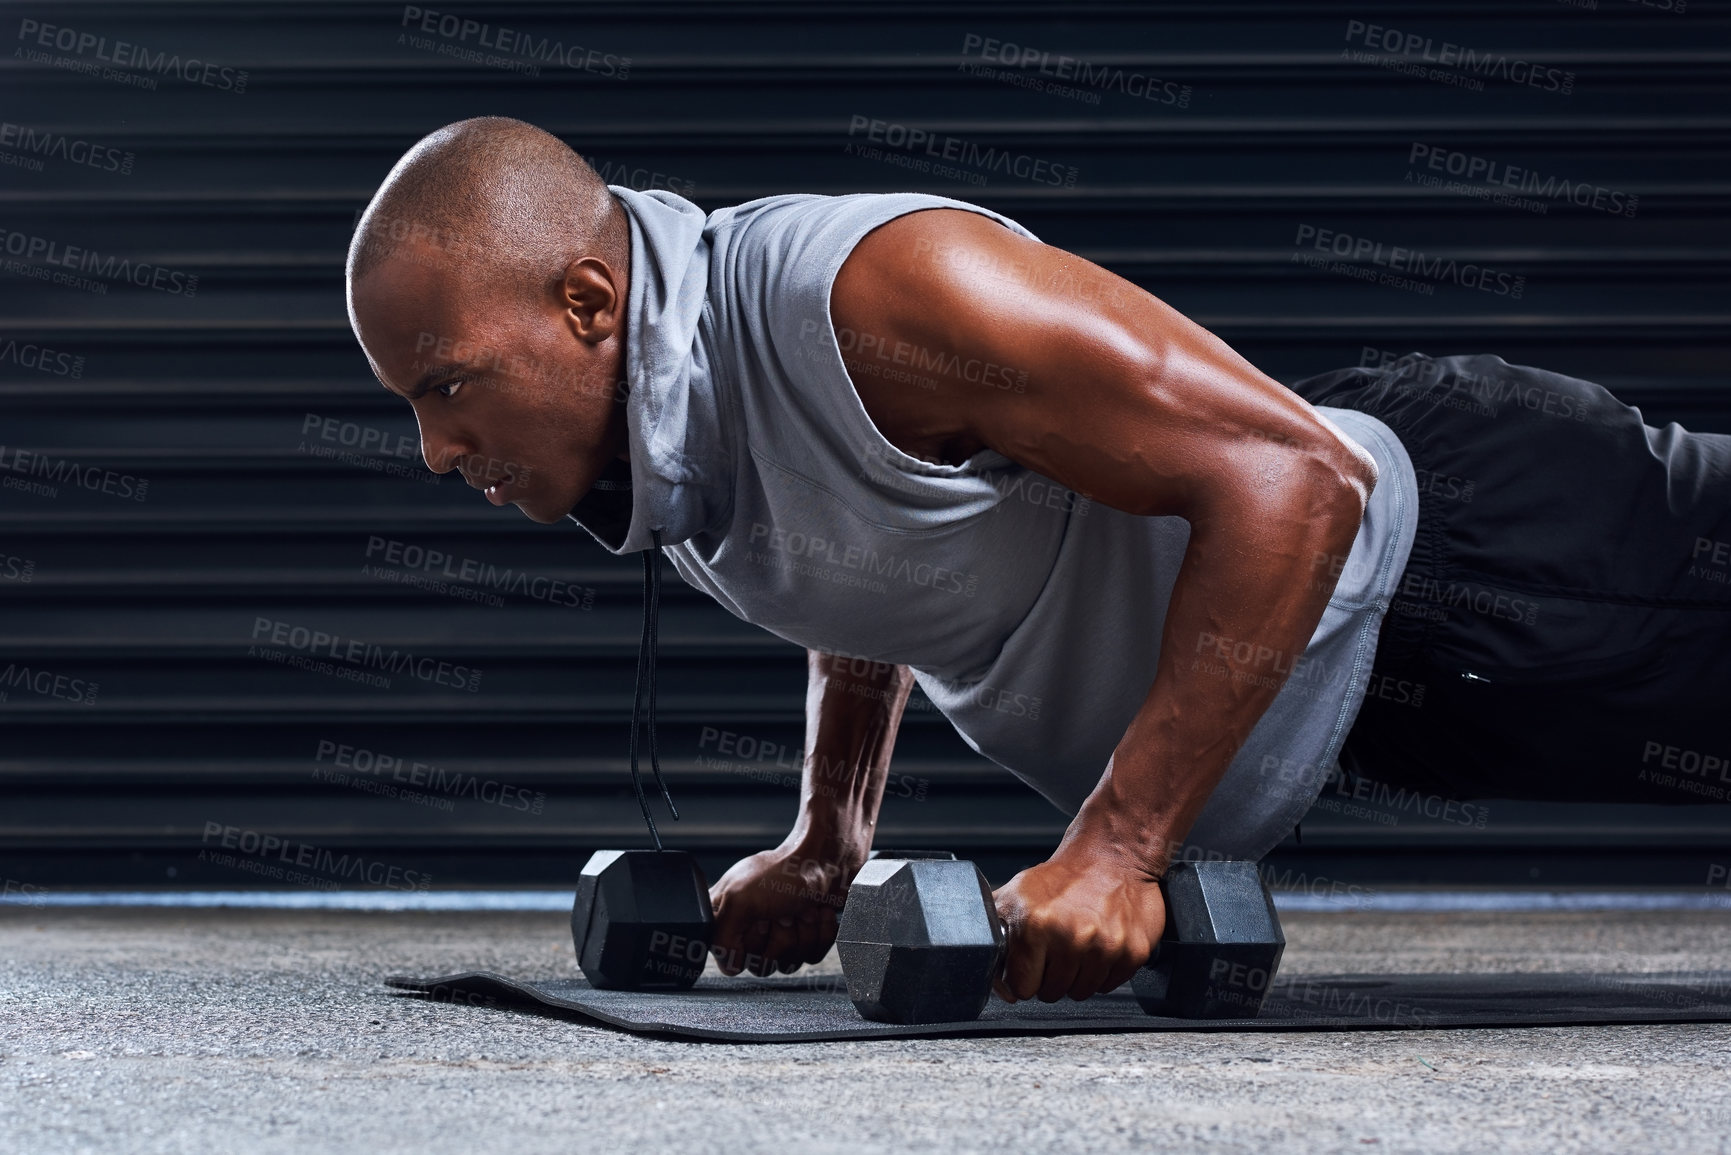 Buy stock photo Shot of a sporty young man working out with dumbbells as part of his exercise routine